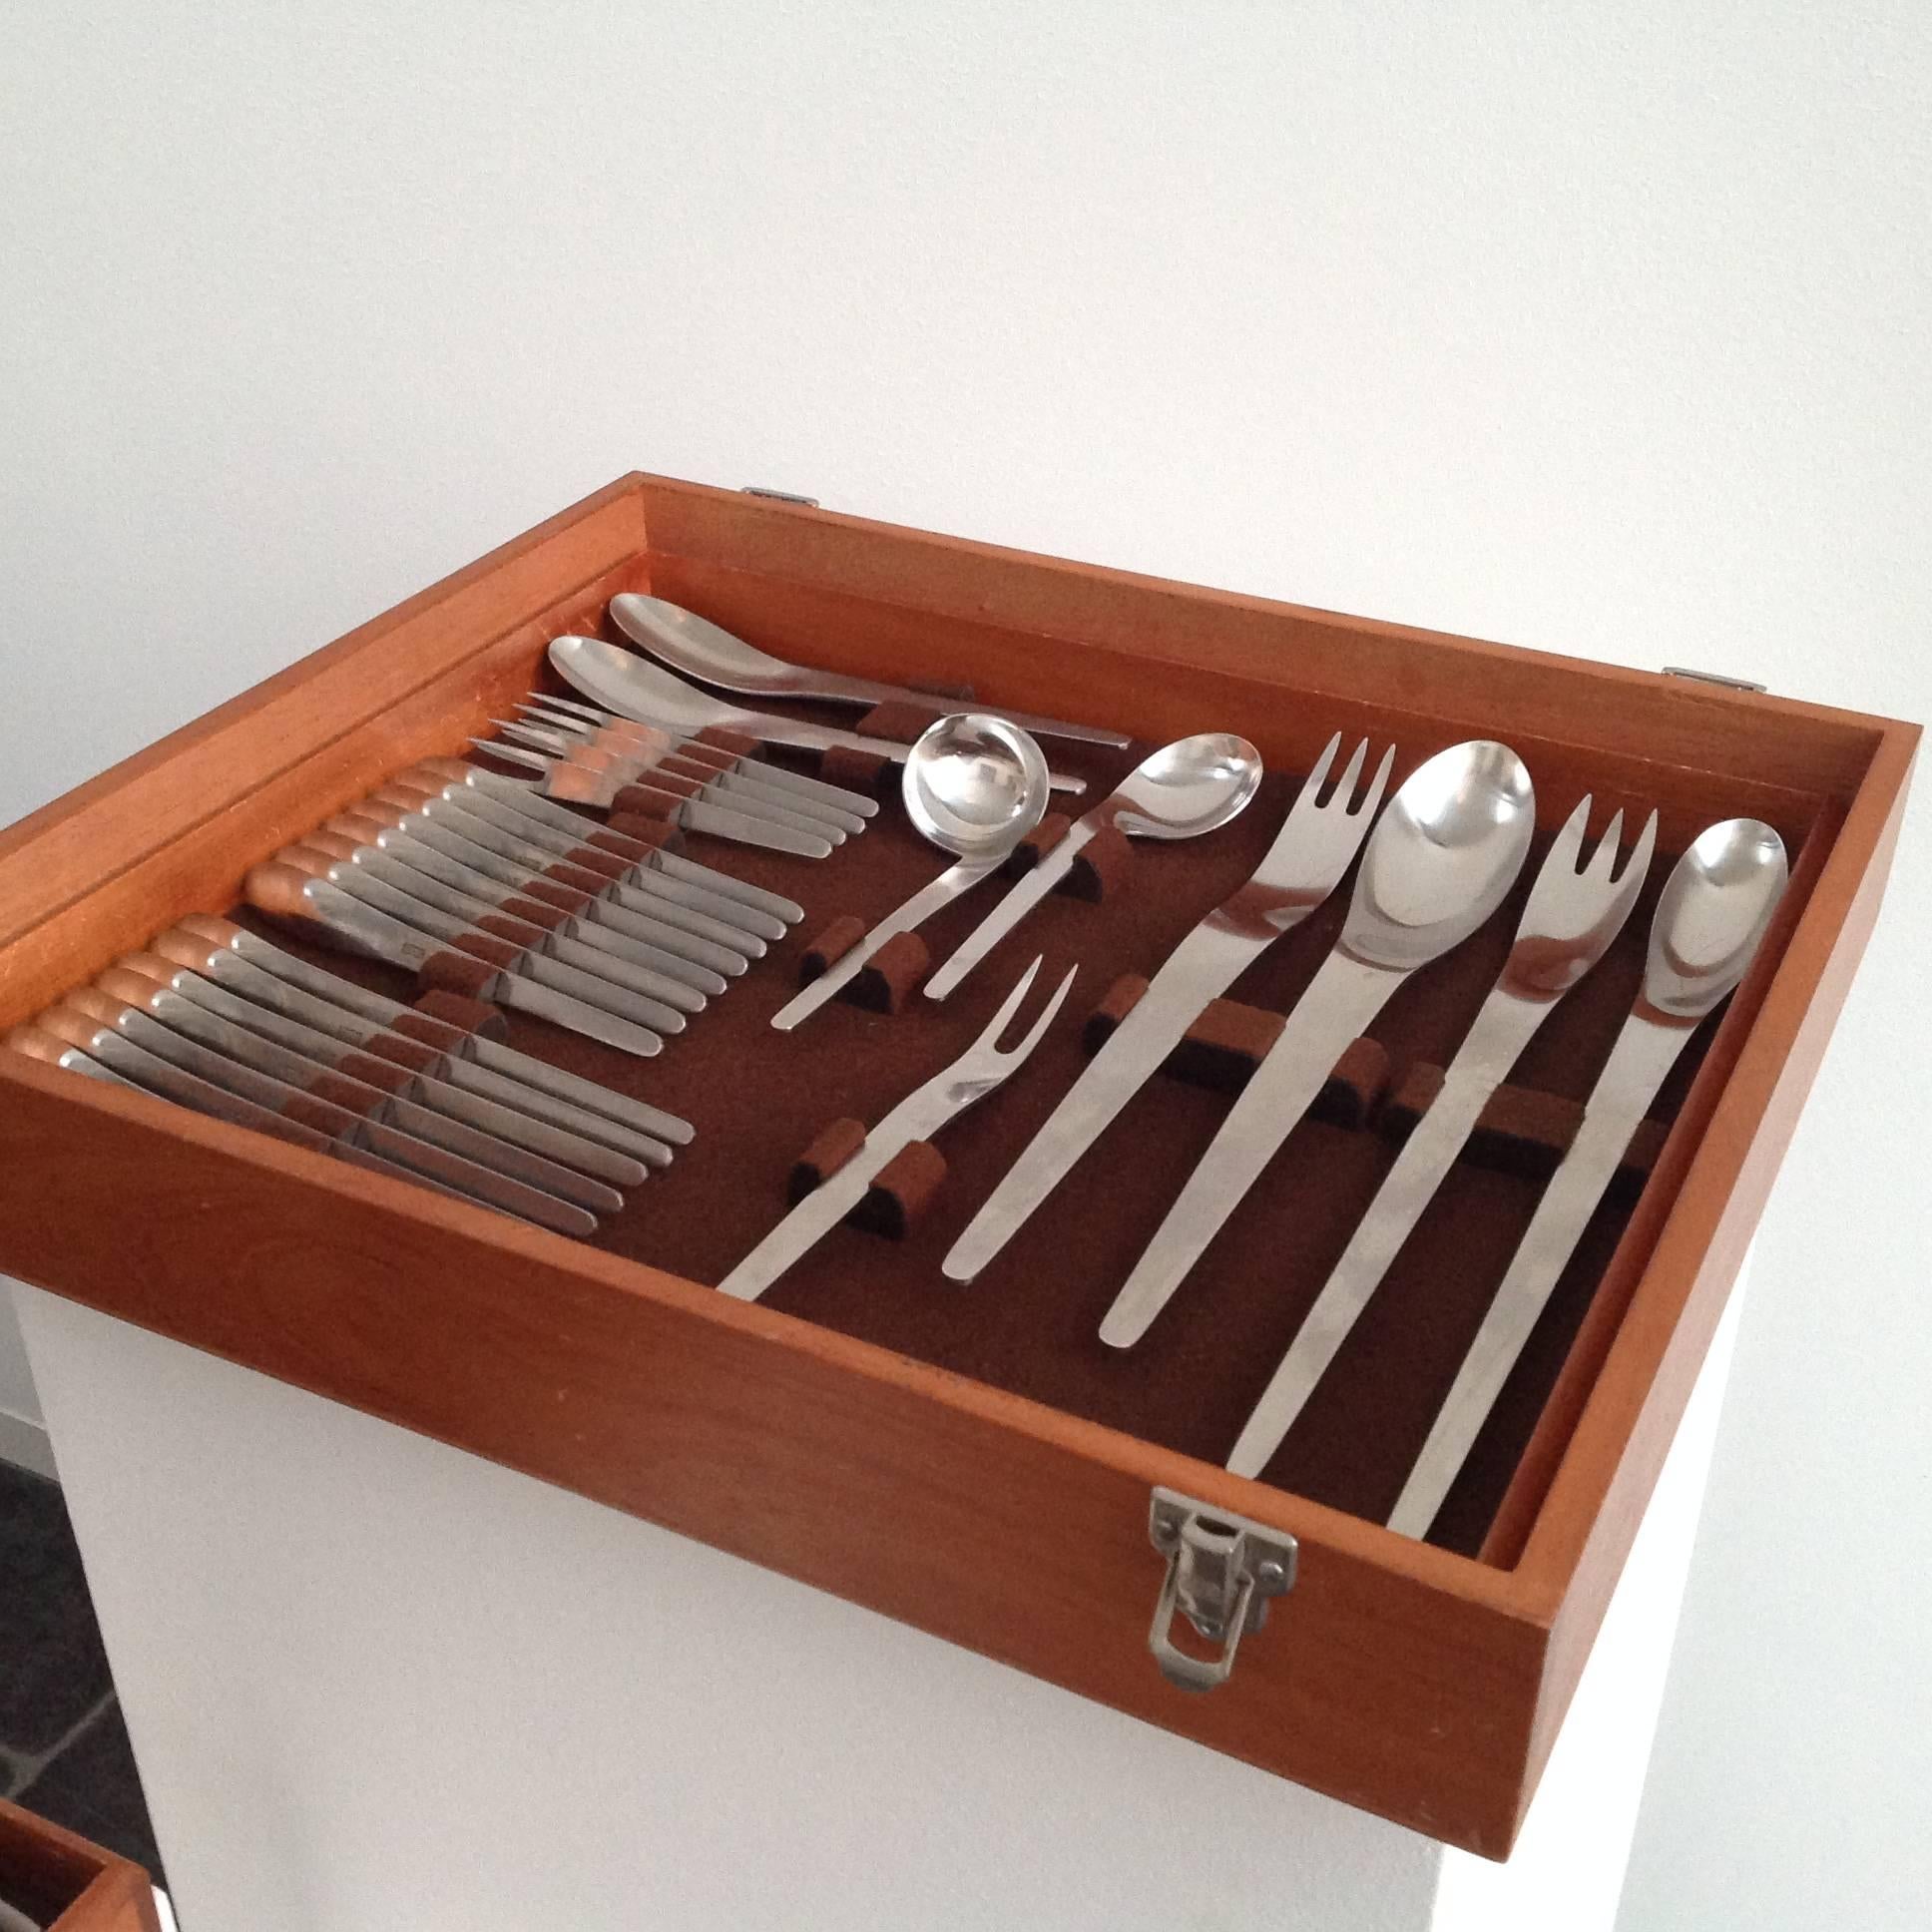 Arne Jacobsen Designed Flatware for Eight Made by a. Michelsen in Very Good Cond 1